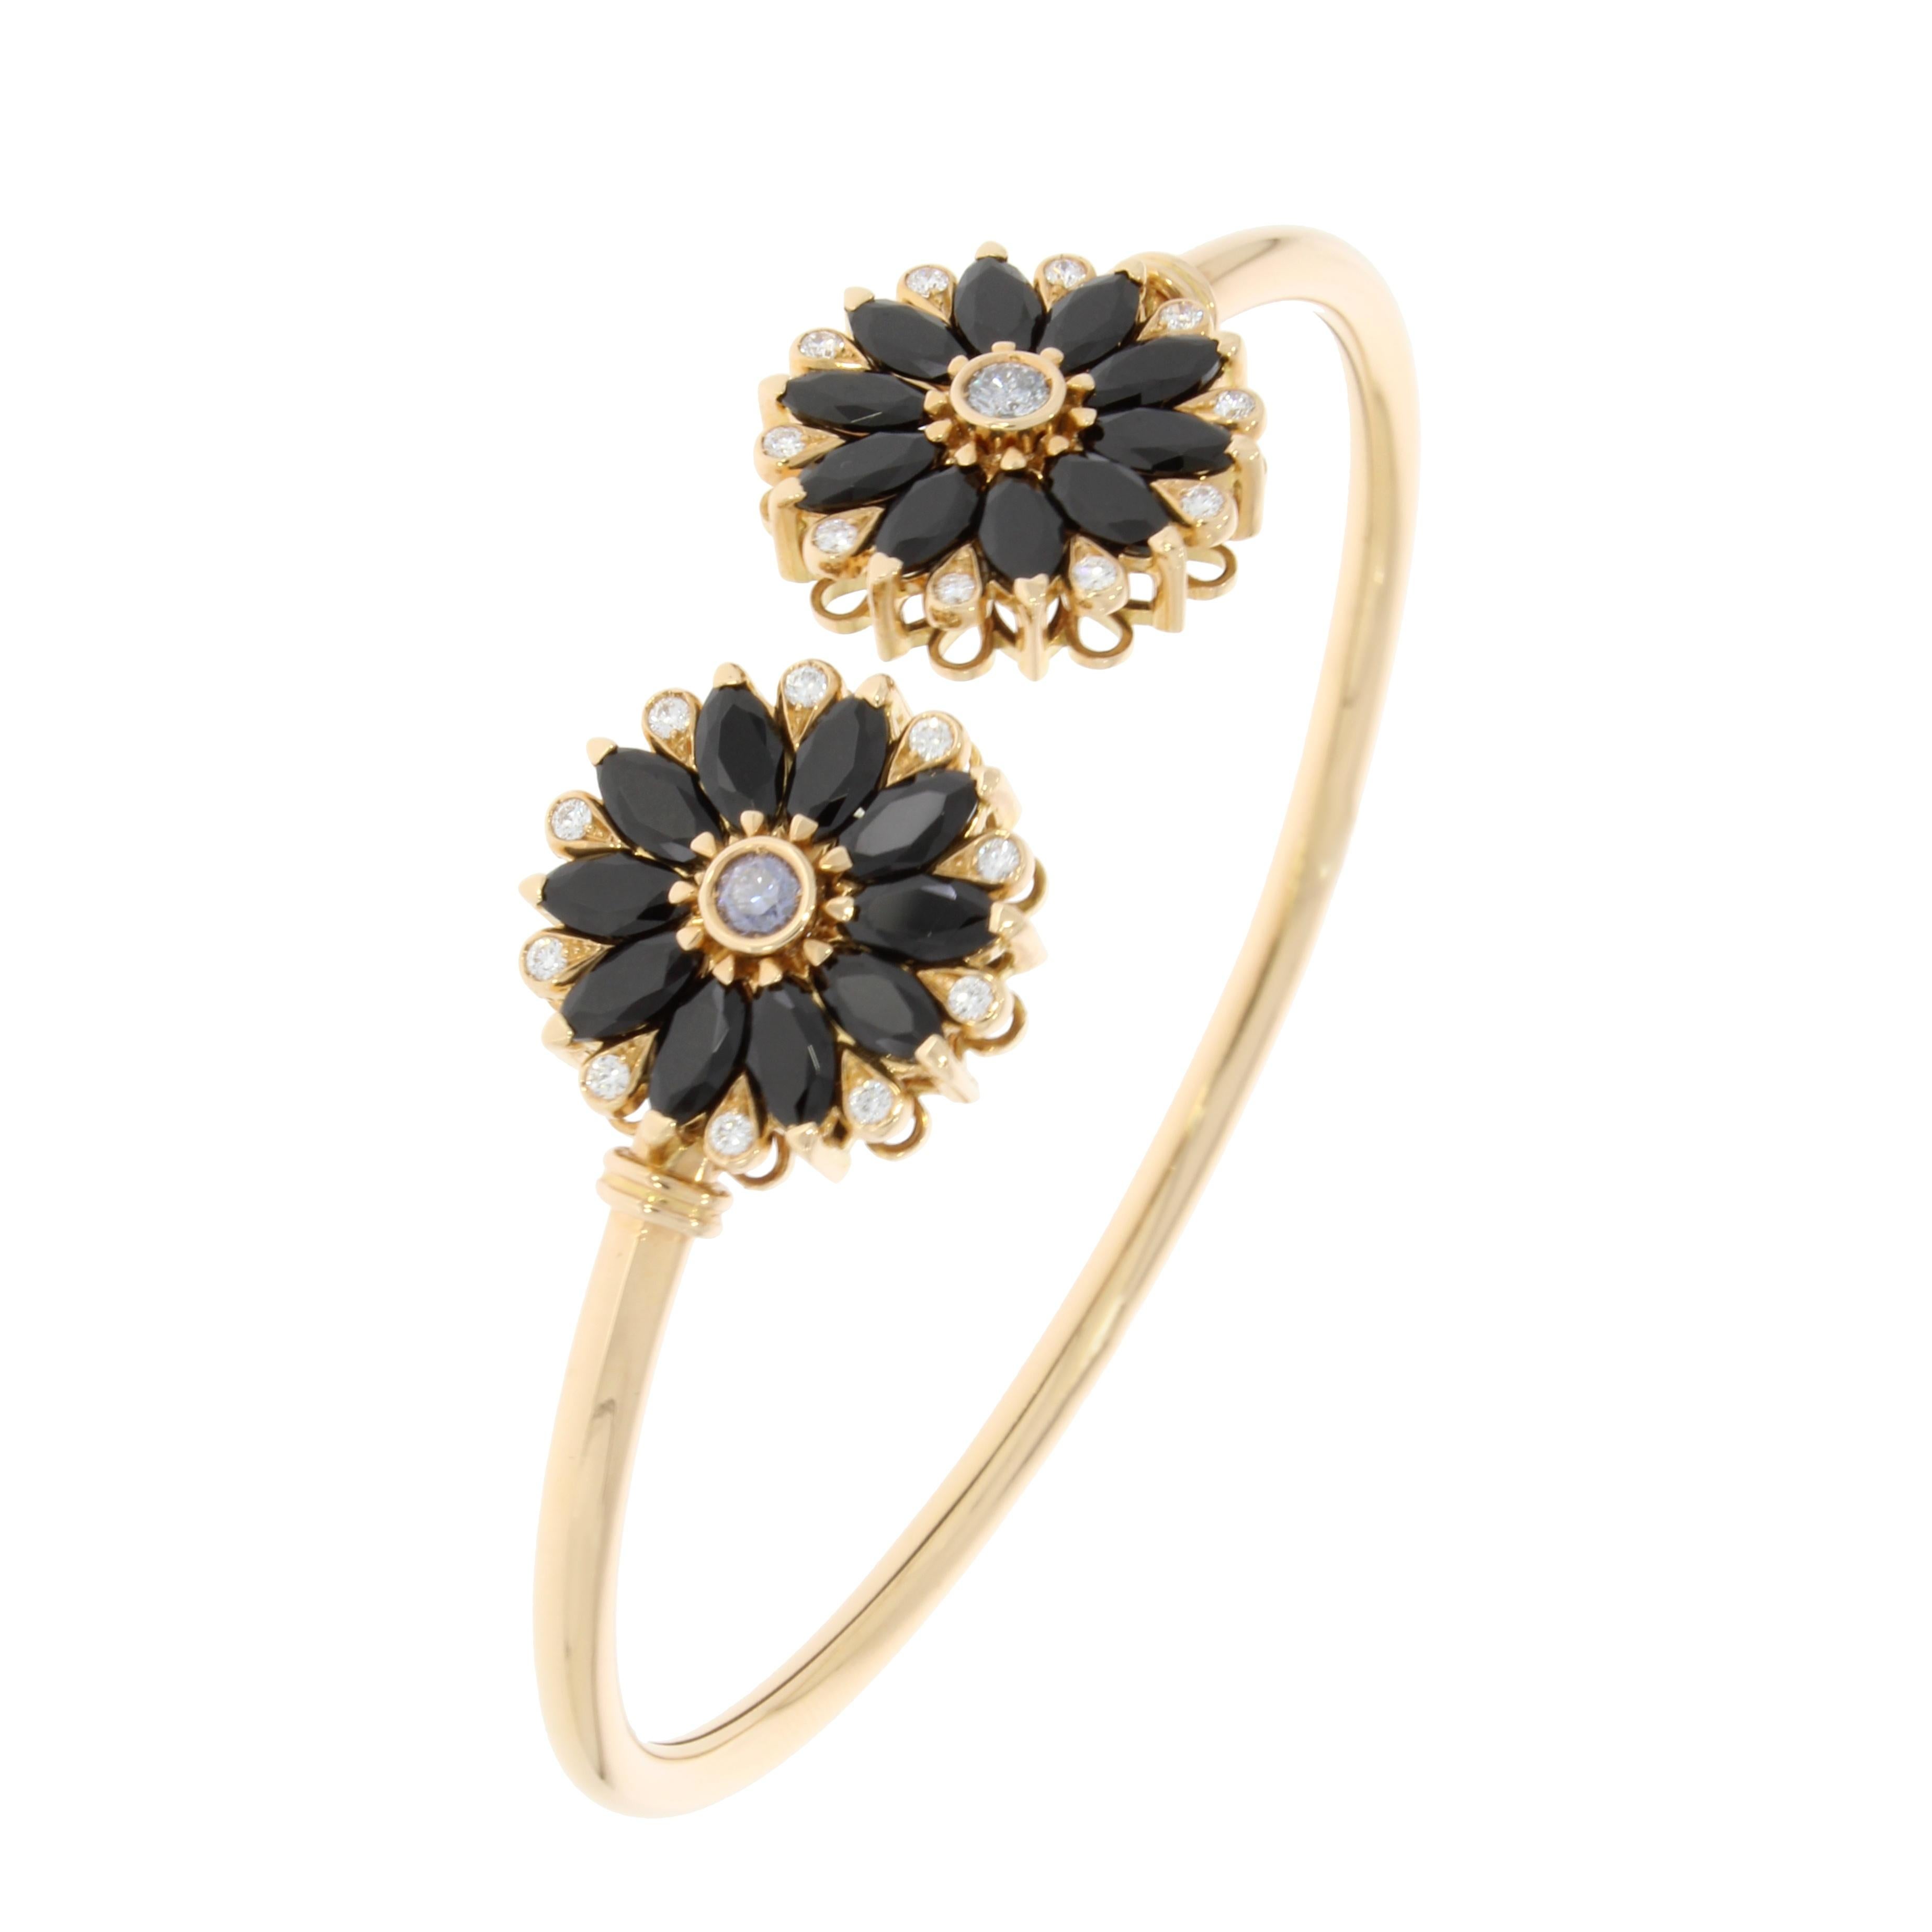 A sleek bangle with two exquisite flowers in bloom honoured with marquise cut black spinels separated with brilliant cut diamonds, capturing the delicate beauty of nature.

Dalia Bangle details:
- 18 Karat Rose Gold
- 5.08 Carat Marquise Black